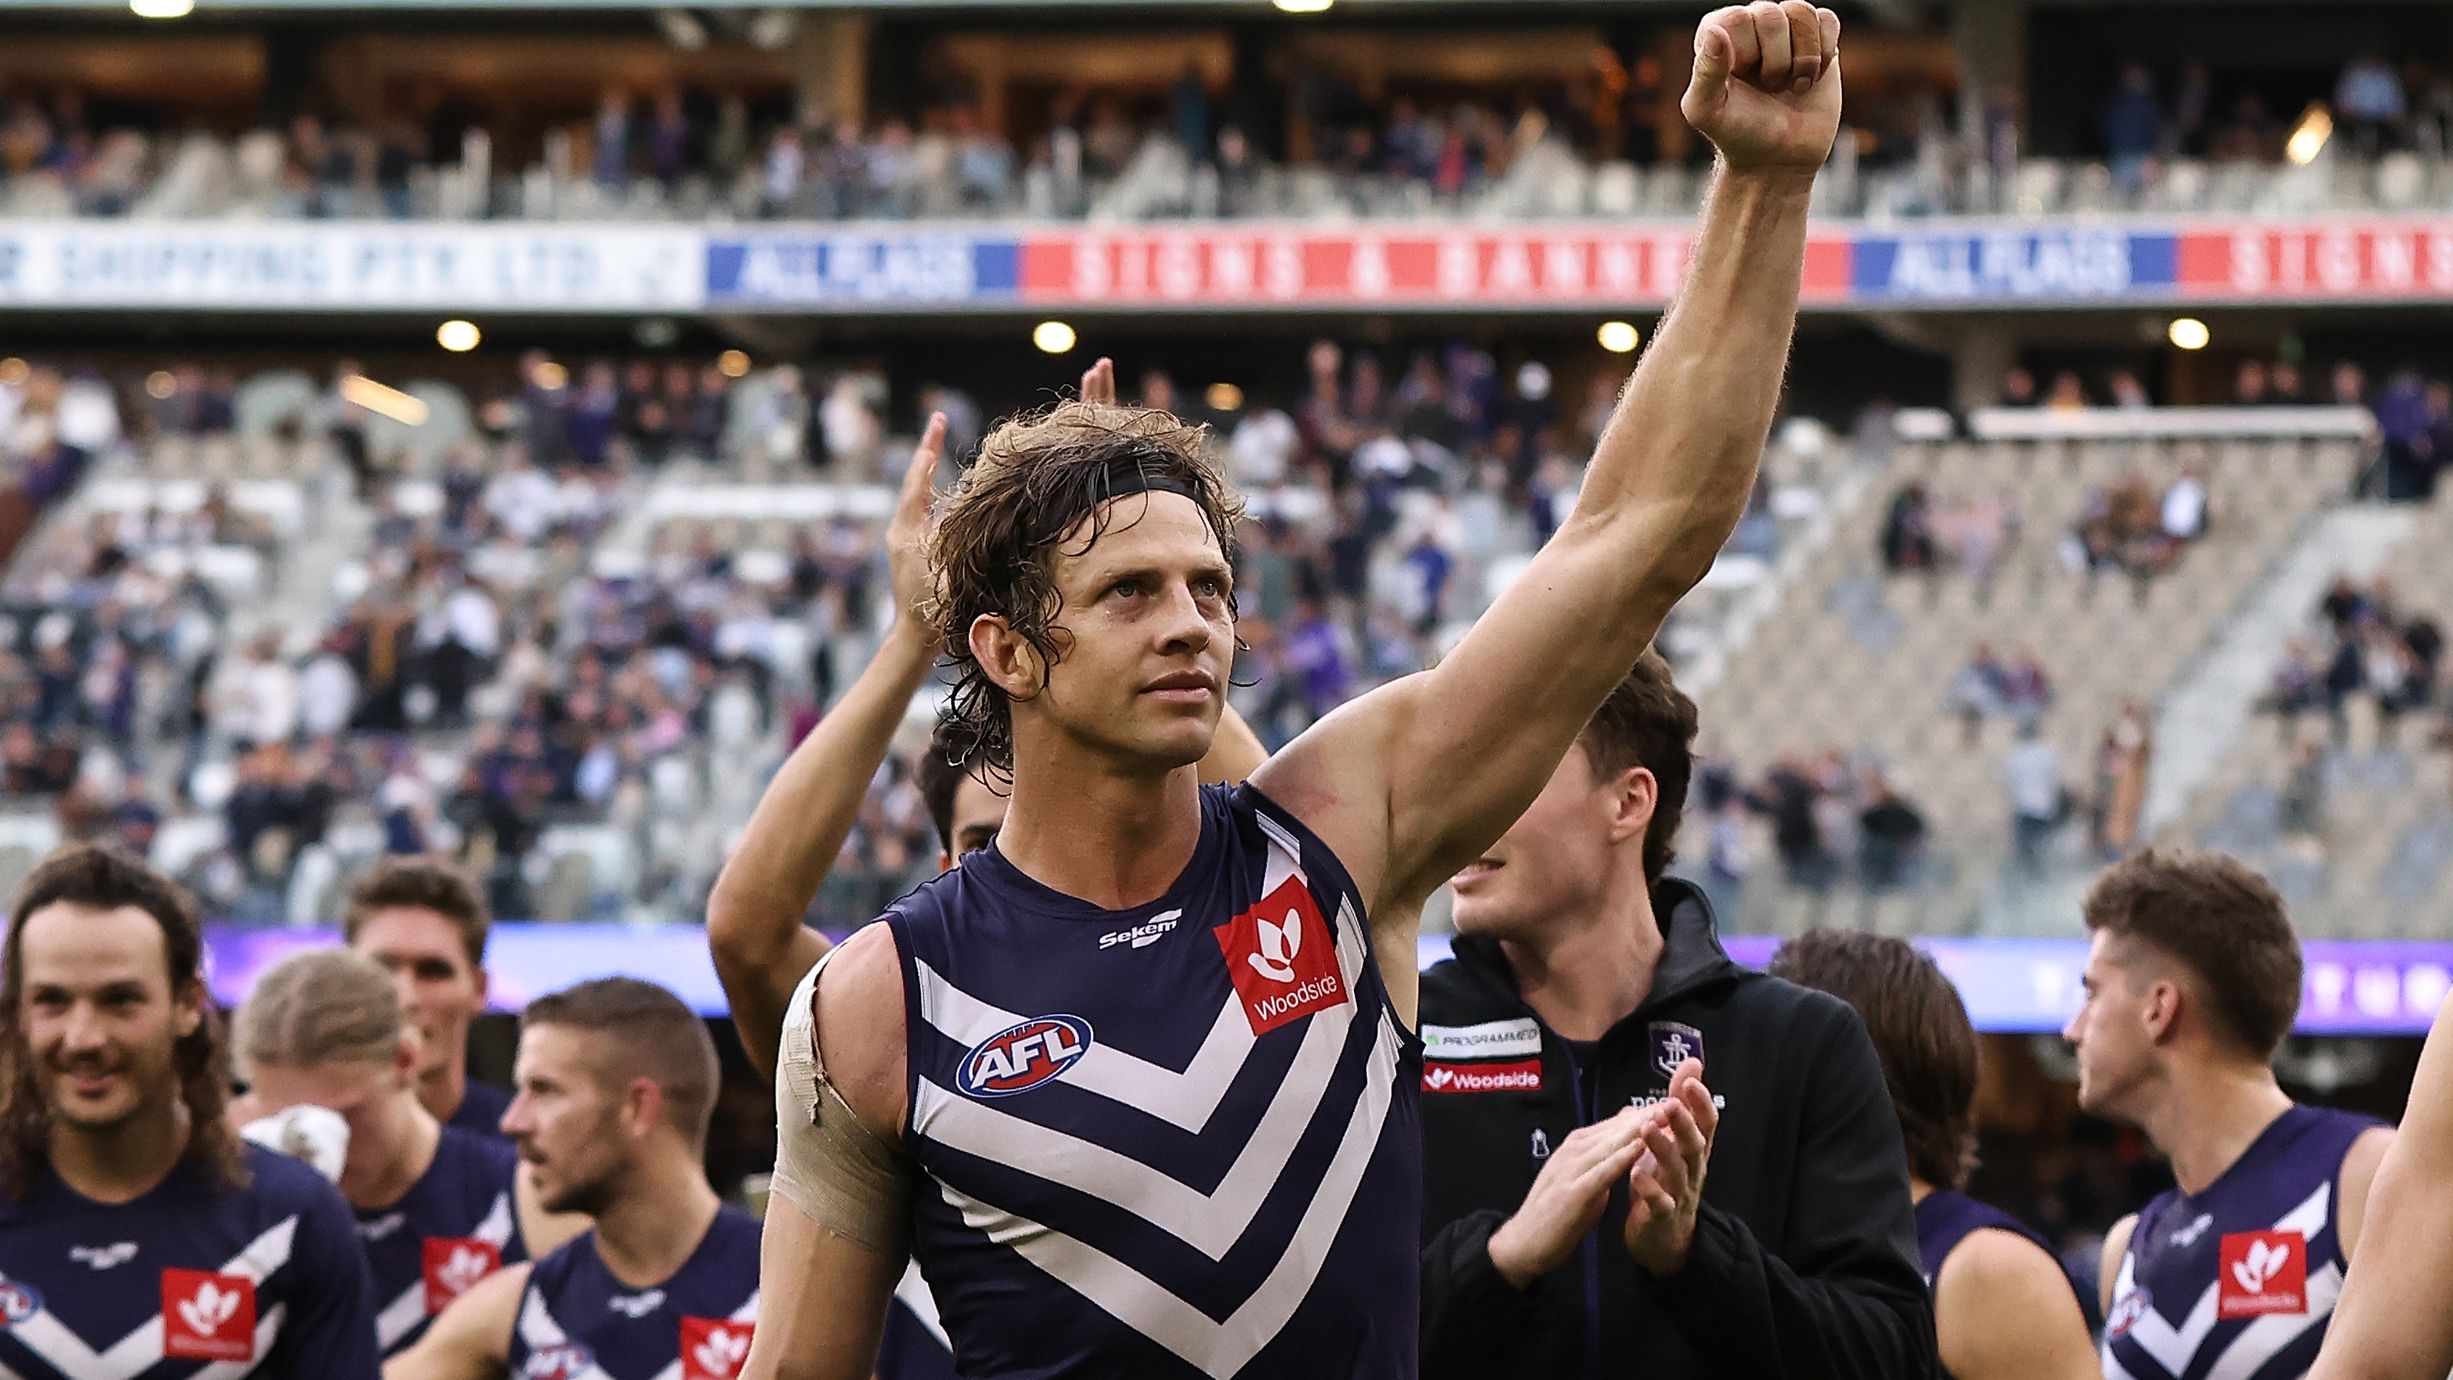 PERTH, AUSTRALIA - JUNE 11: Nat Fyfe of the Dockers leads the team from the field after winning the round 13 AFL match between the Fremantle Dockers and the Hawthorn Hawks at Optus Stadium on June 11, 2022 in Perth, Australia. (Photo by Paul Kane/Getty Images)